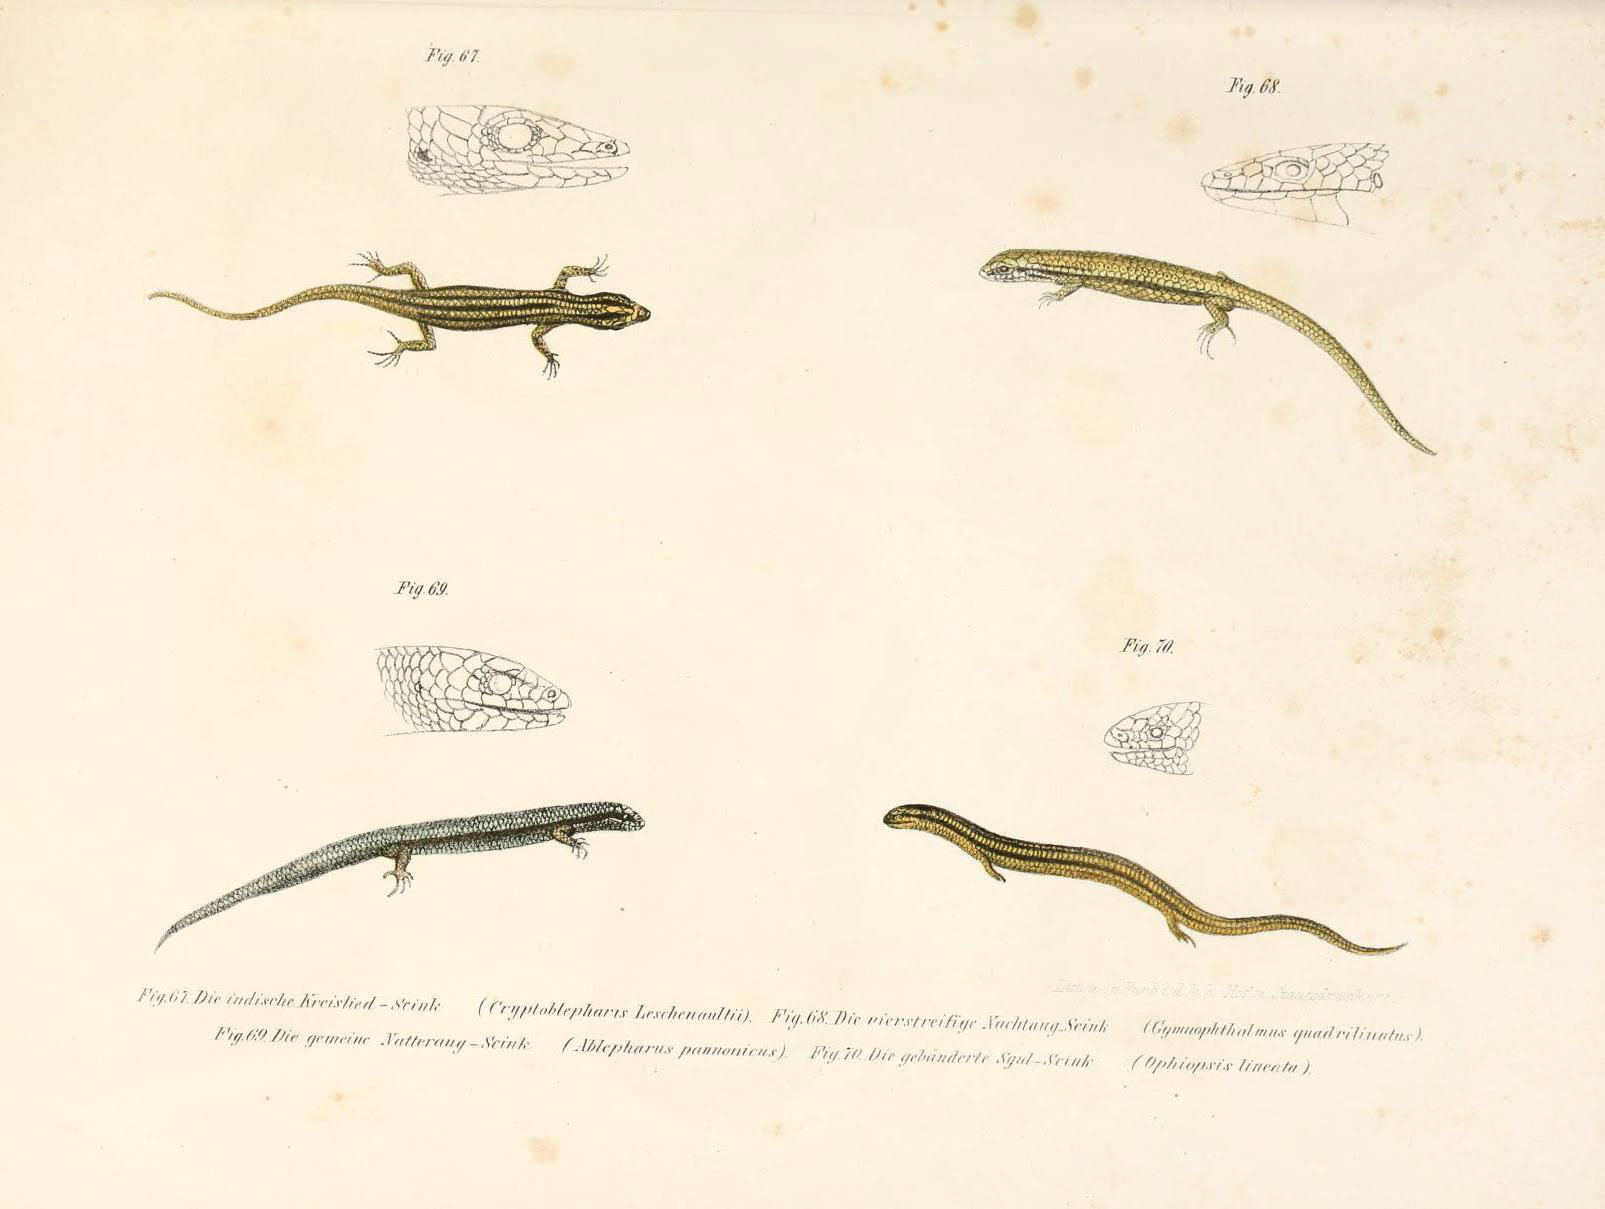 a group of lizards on top of a book